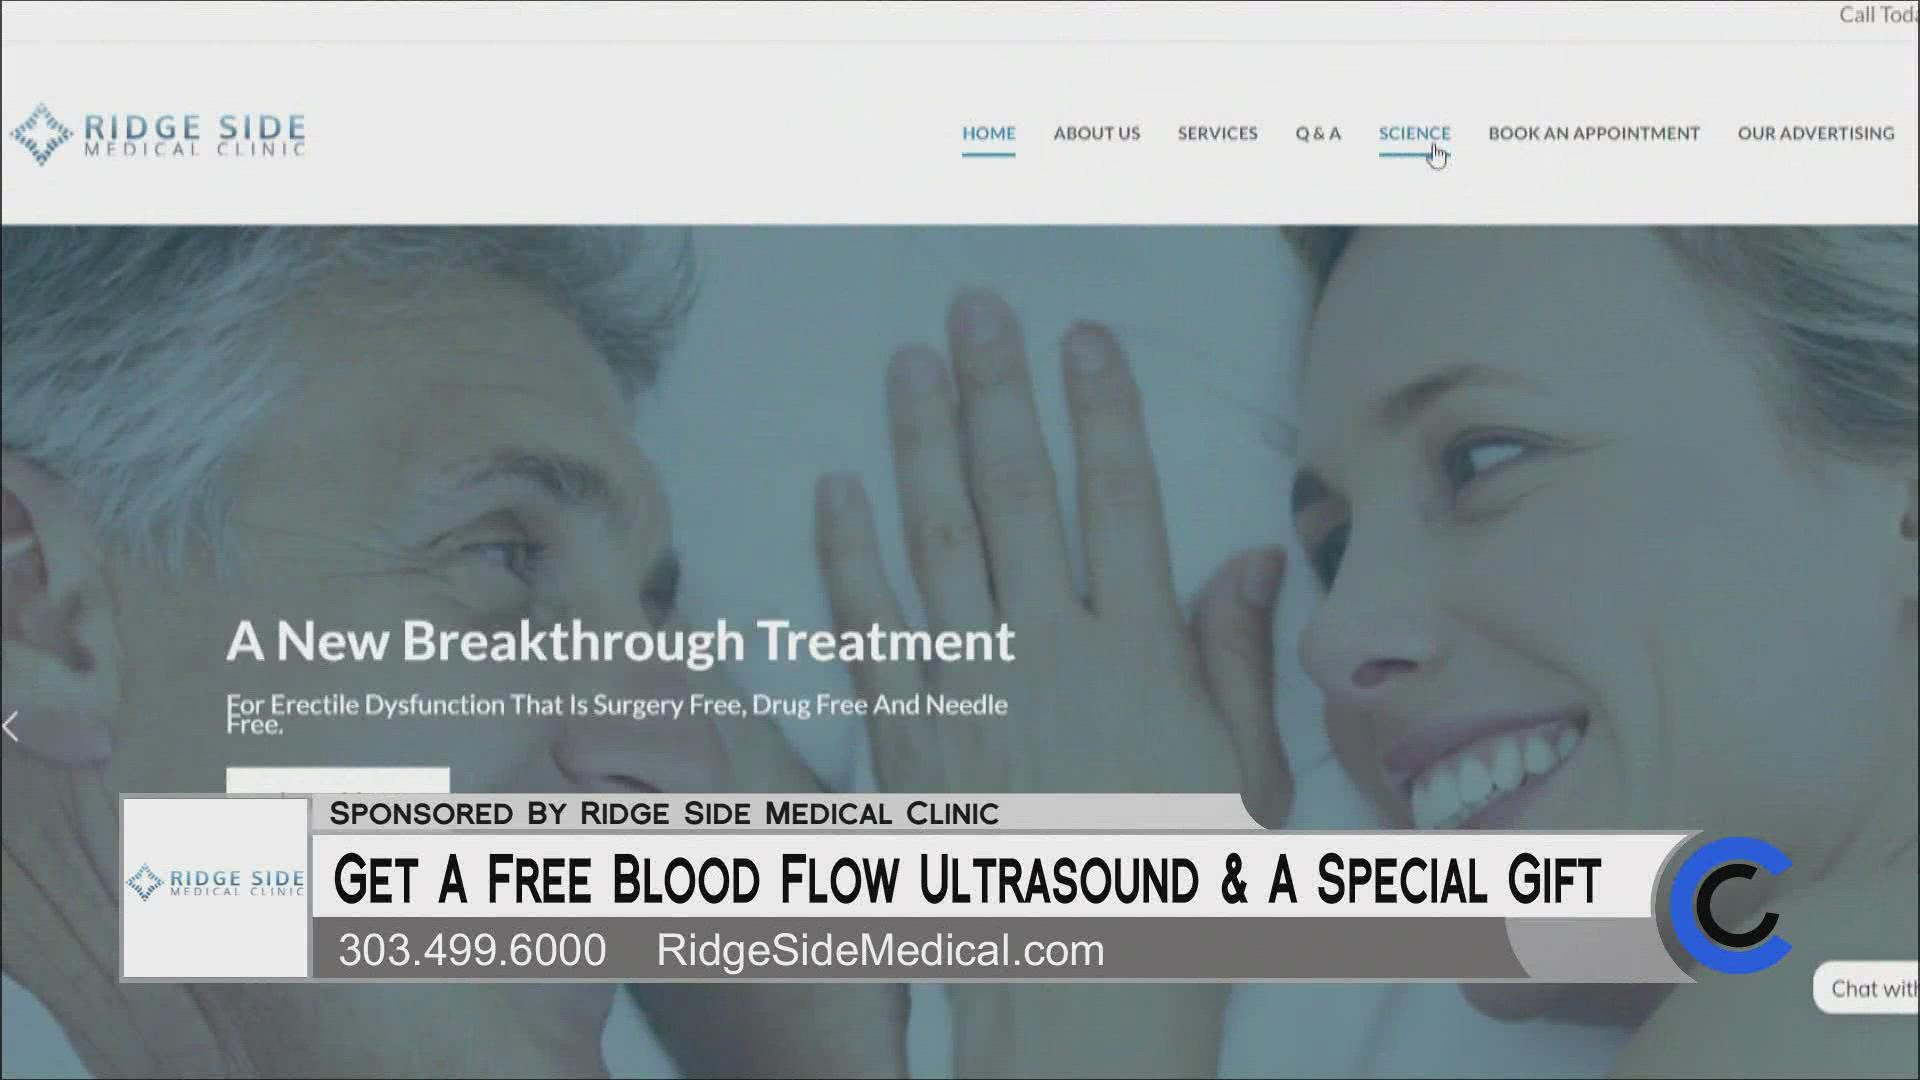 Call Ridge Side at 303.499.6000. Mention COCO for a free exam, blood flow ultrasound and special gift! Learn more at RidgeSideMedical.com. **PAID CONTENT**